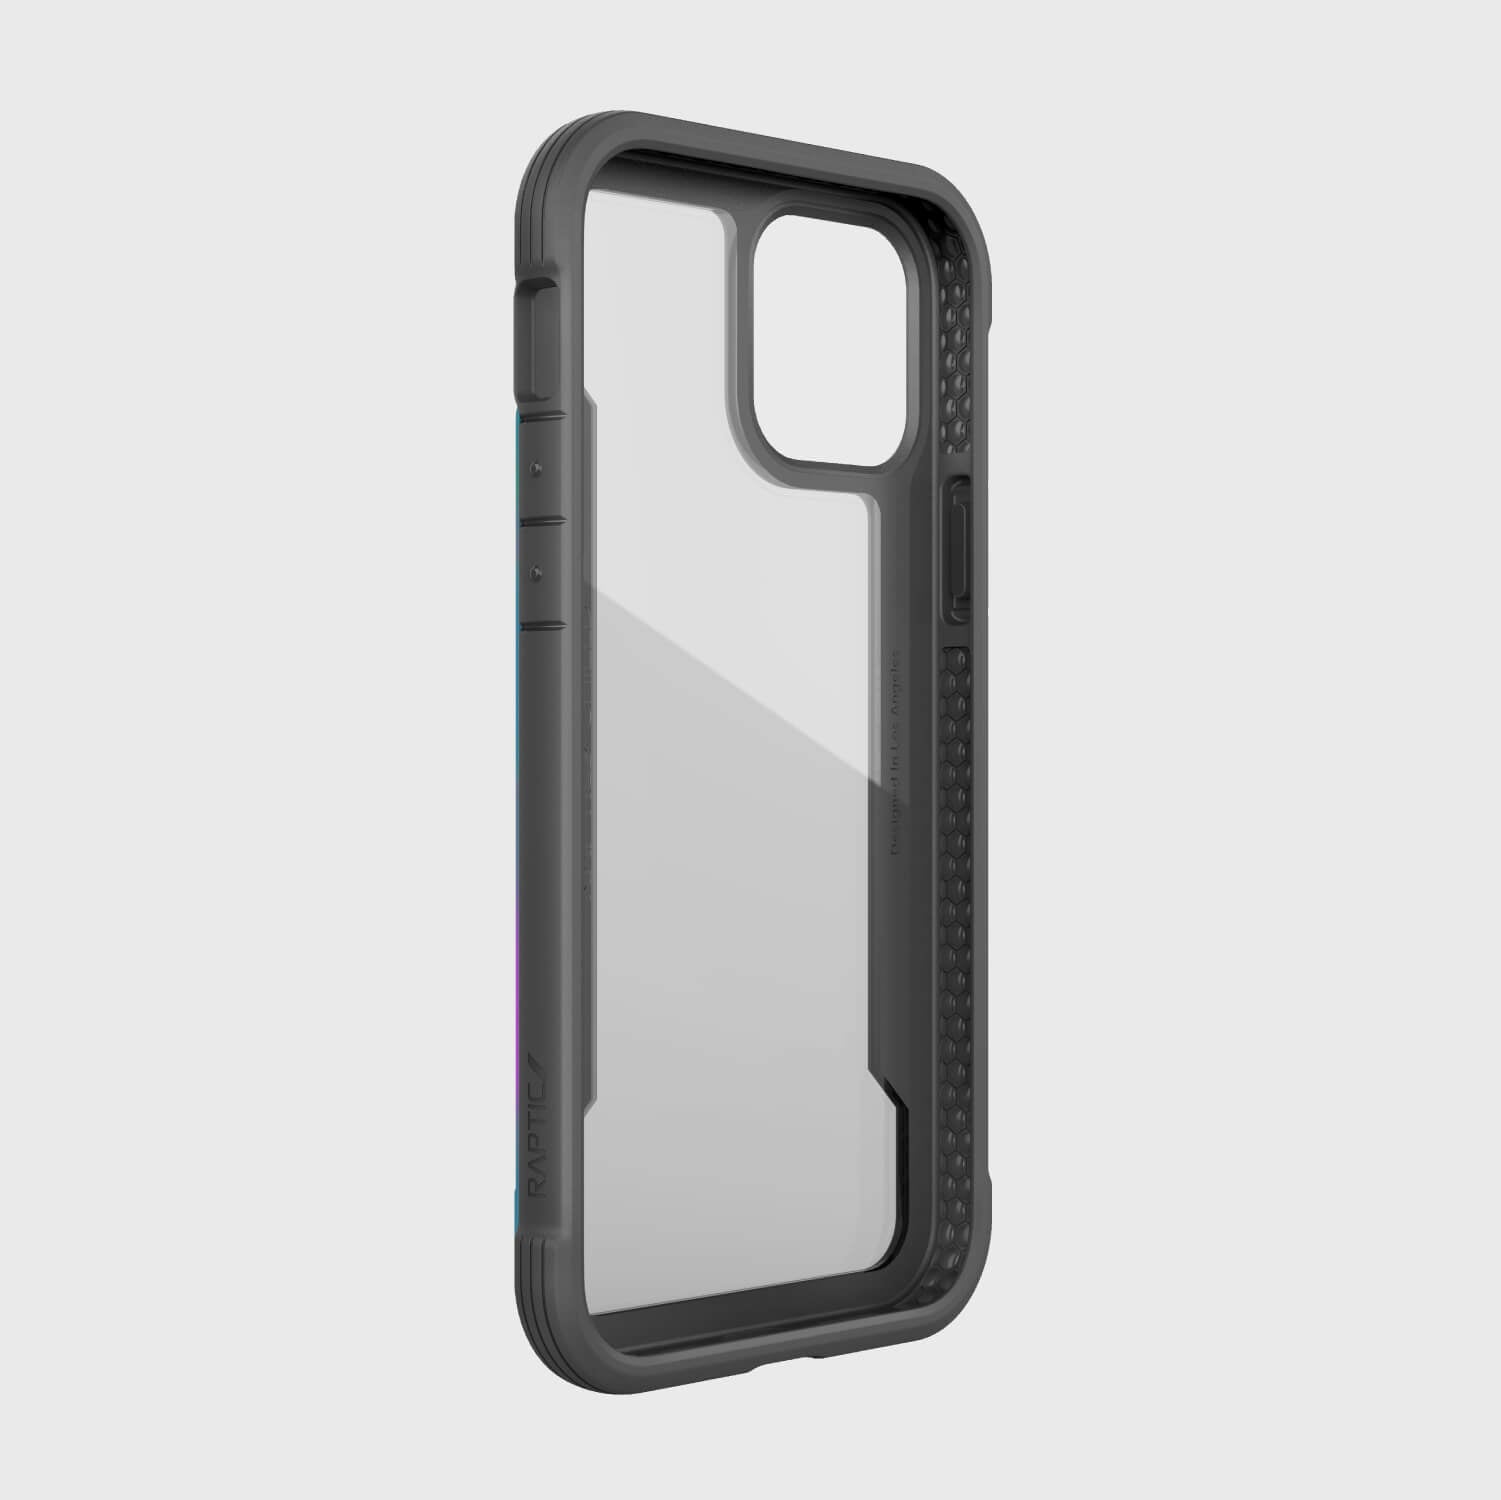 The SHIELD case for the iPhone 12 Pro Max is shown on a white background.